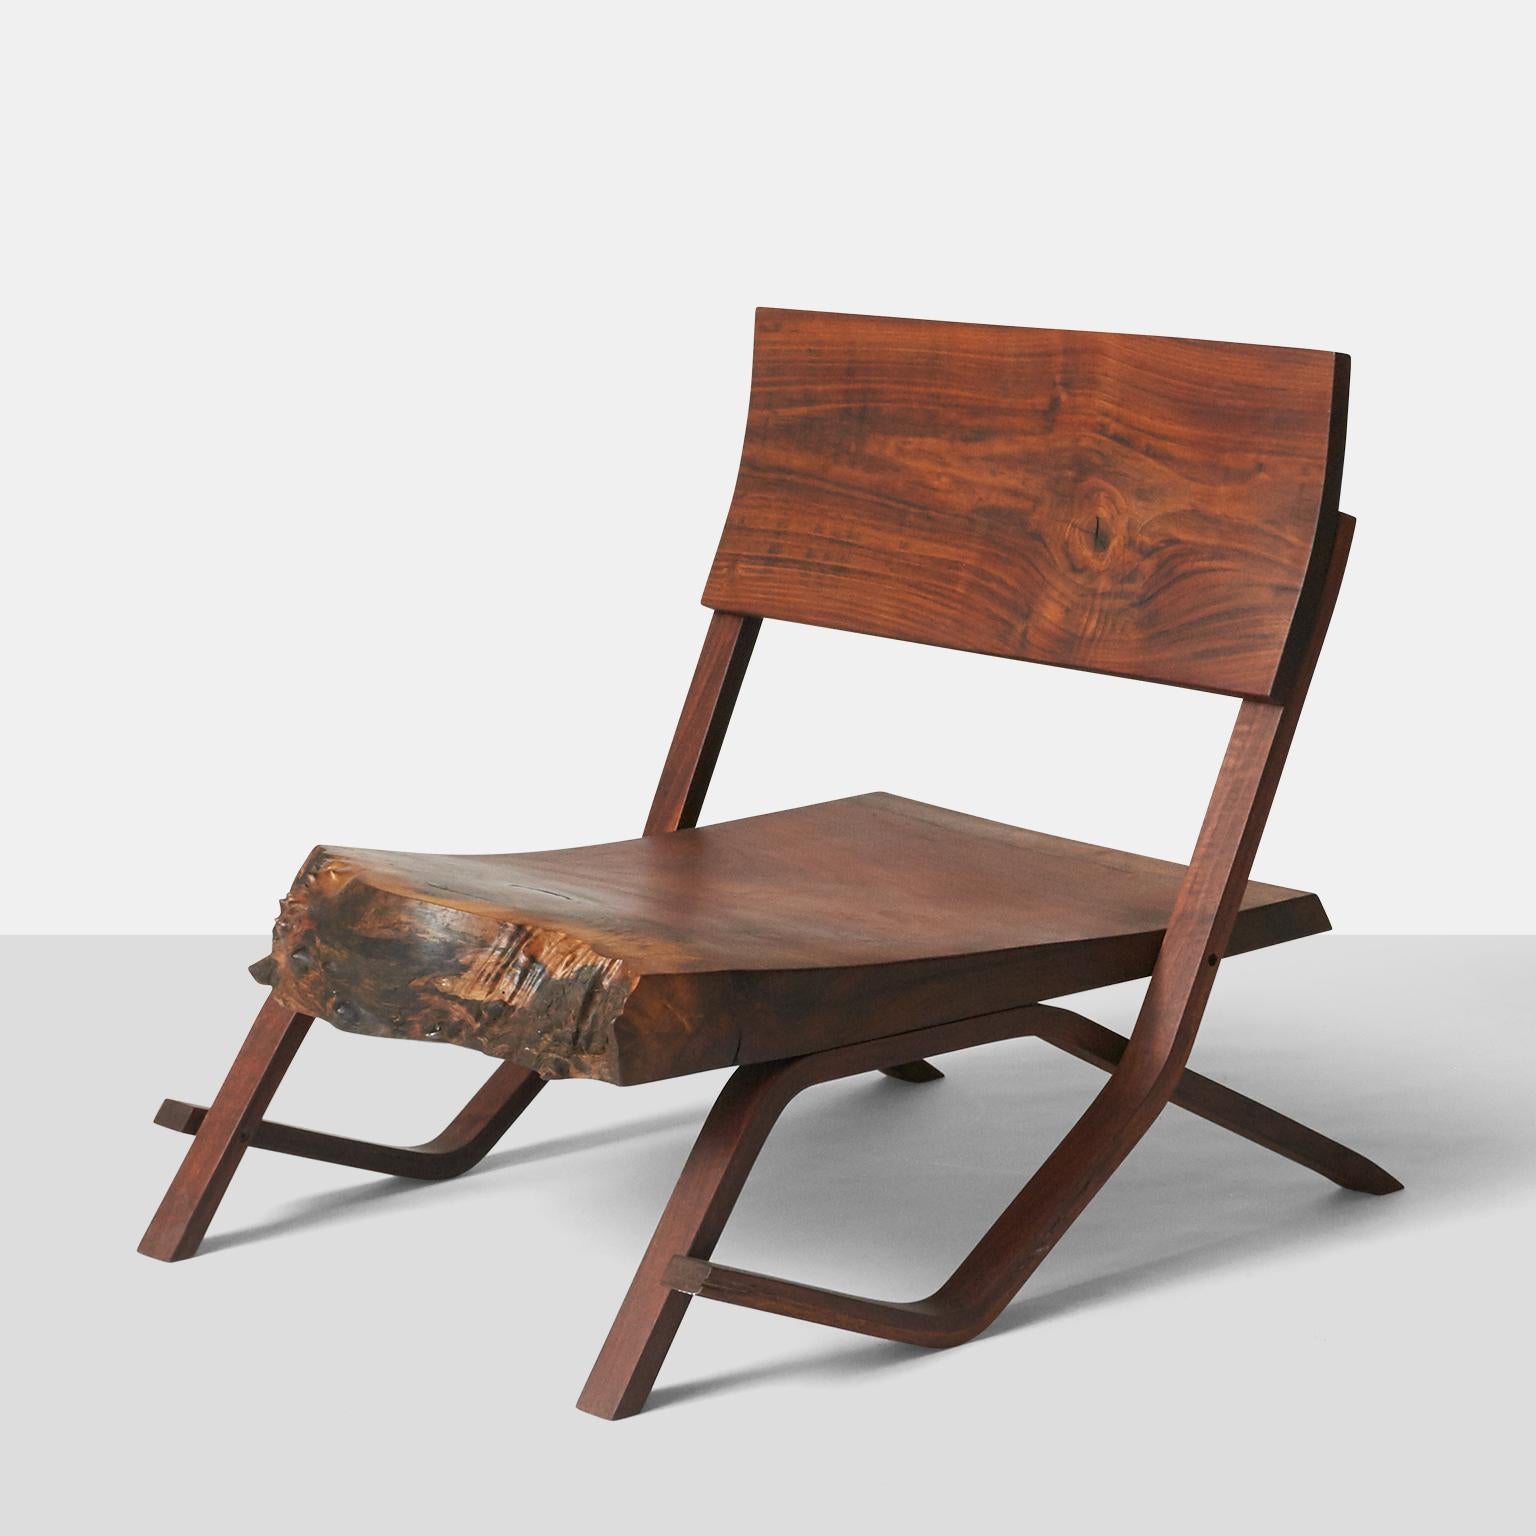 One of a kind Josh Duthie low lounge chair in solid walnut with live edge.